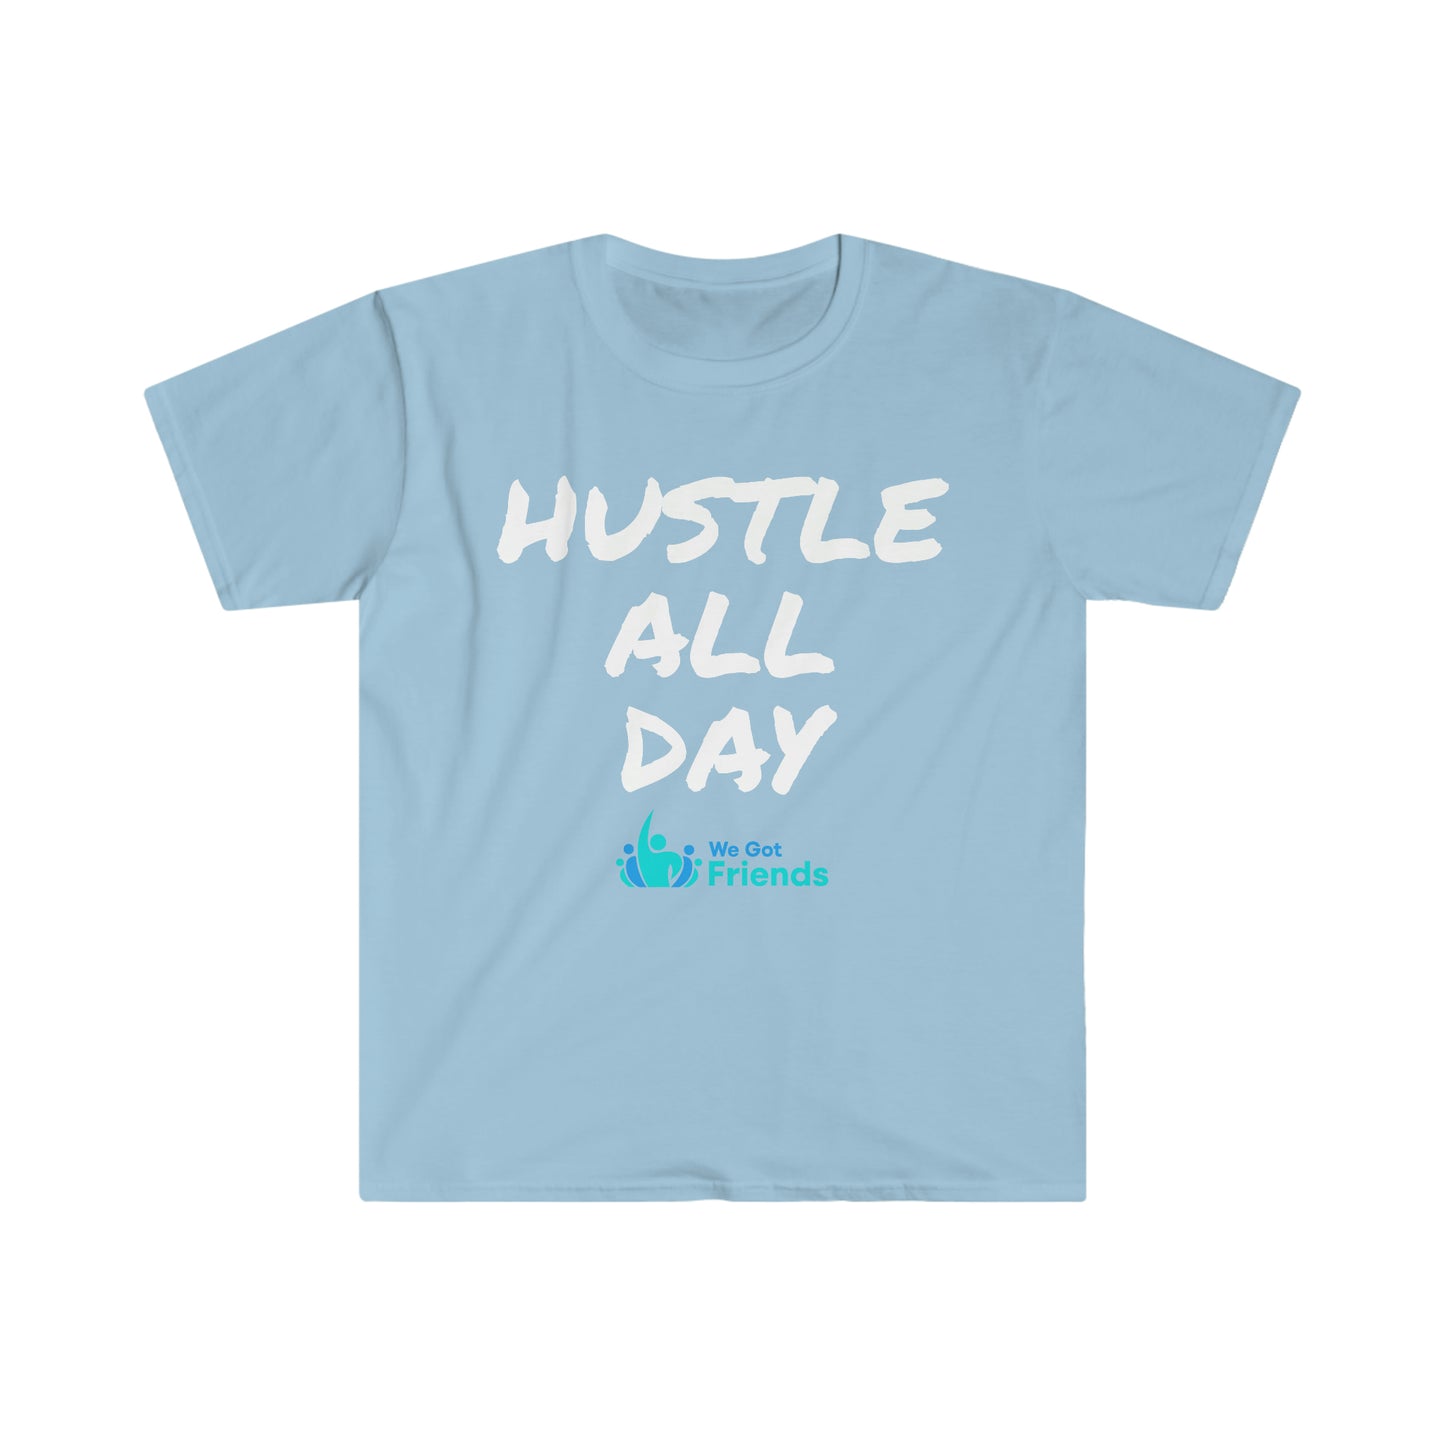 HUSTLE ALL DAY Unisex Softstyle T-Shirt